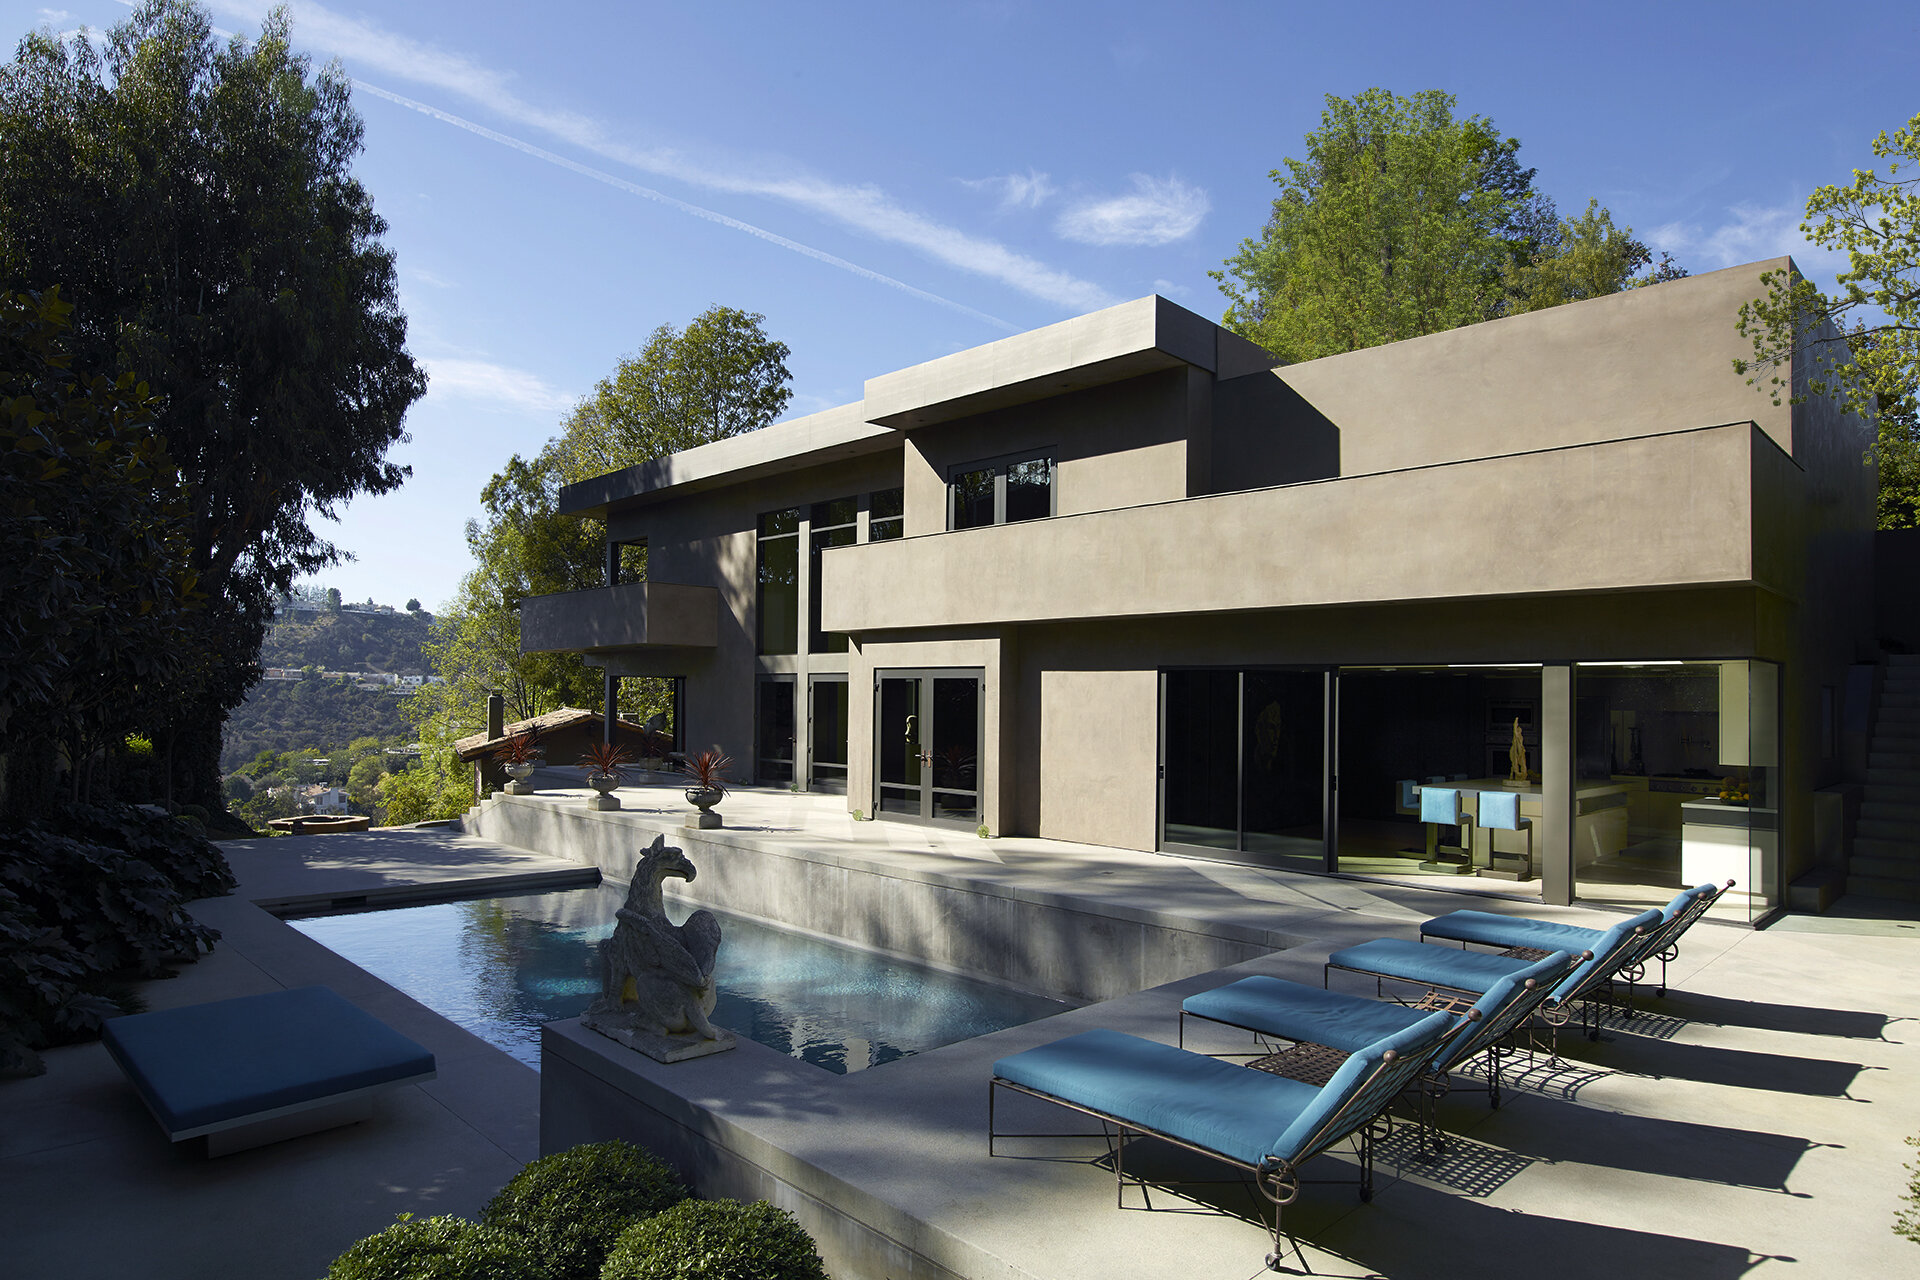  Luxury general contractor award winning architectural modern home for celebrity photographer in the Hollywood Hills neighborhood of Los Angeles featuring award winning architecture by Chu and Gooding with custom pool.  